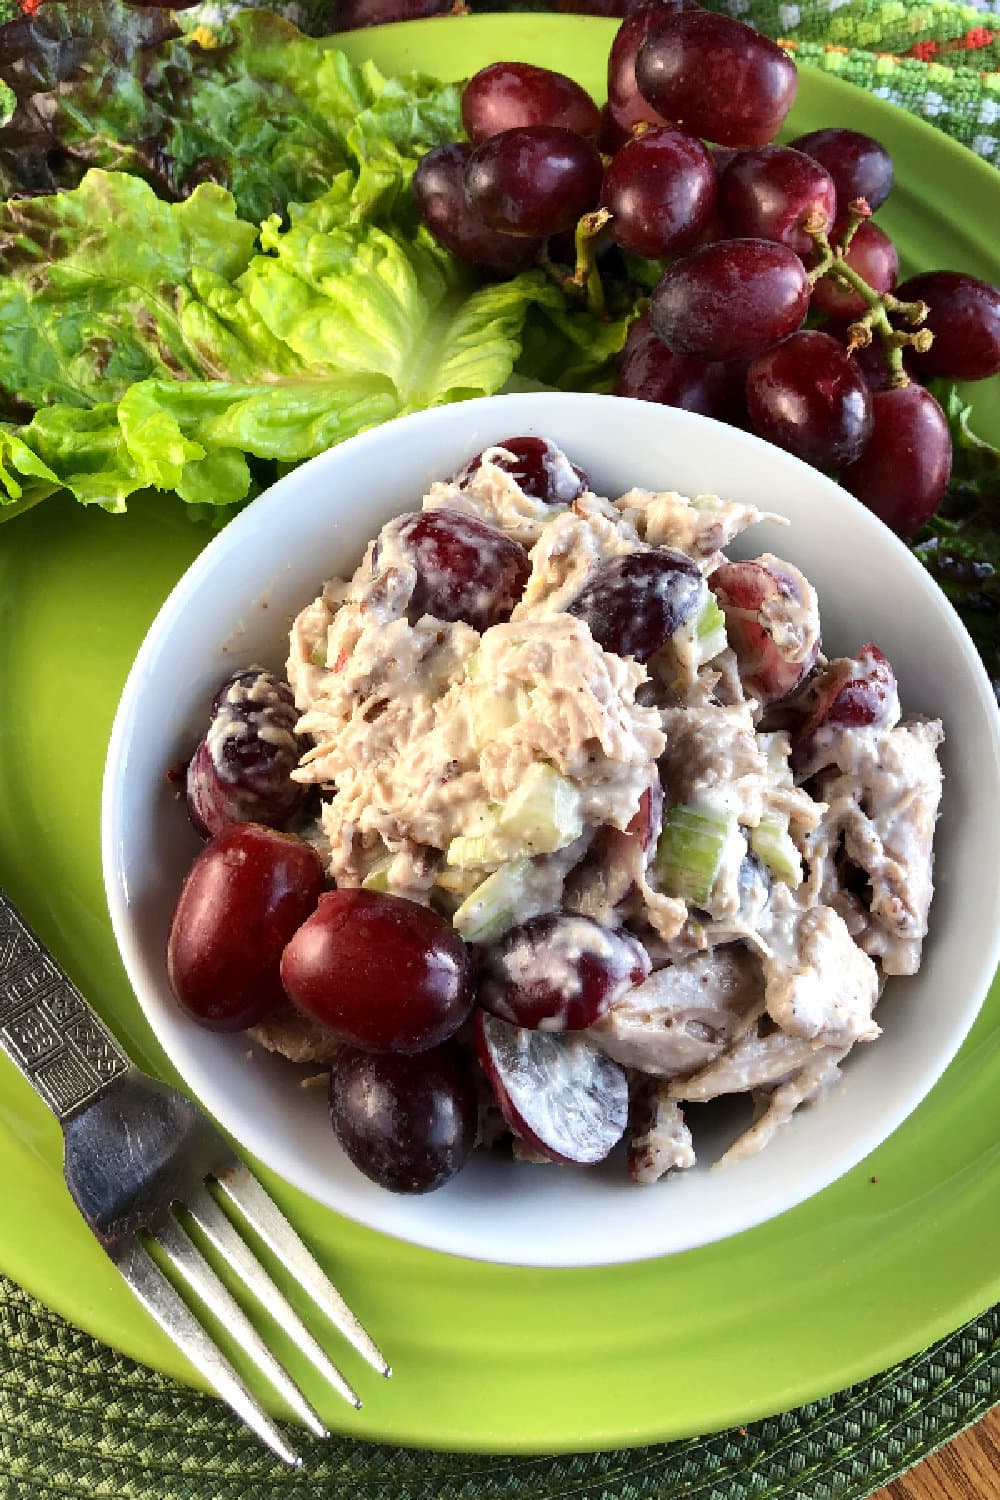 Refreshing chicken salad with grapes and walnuts